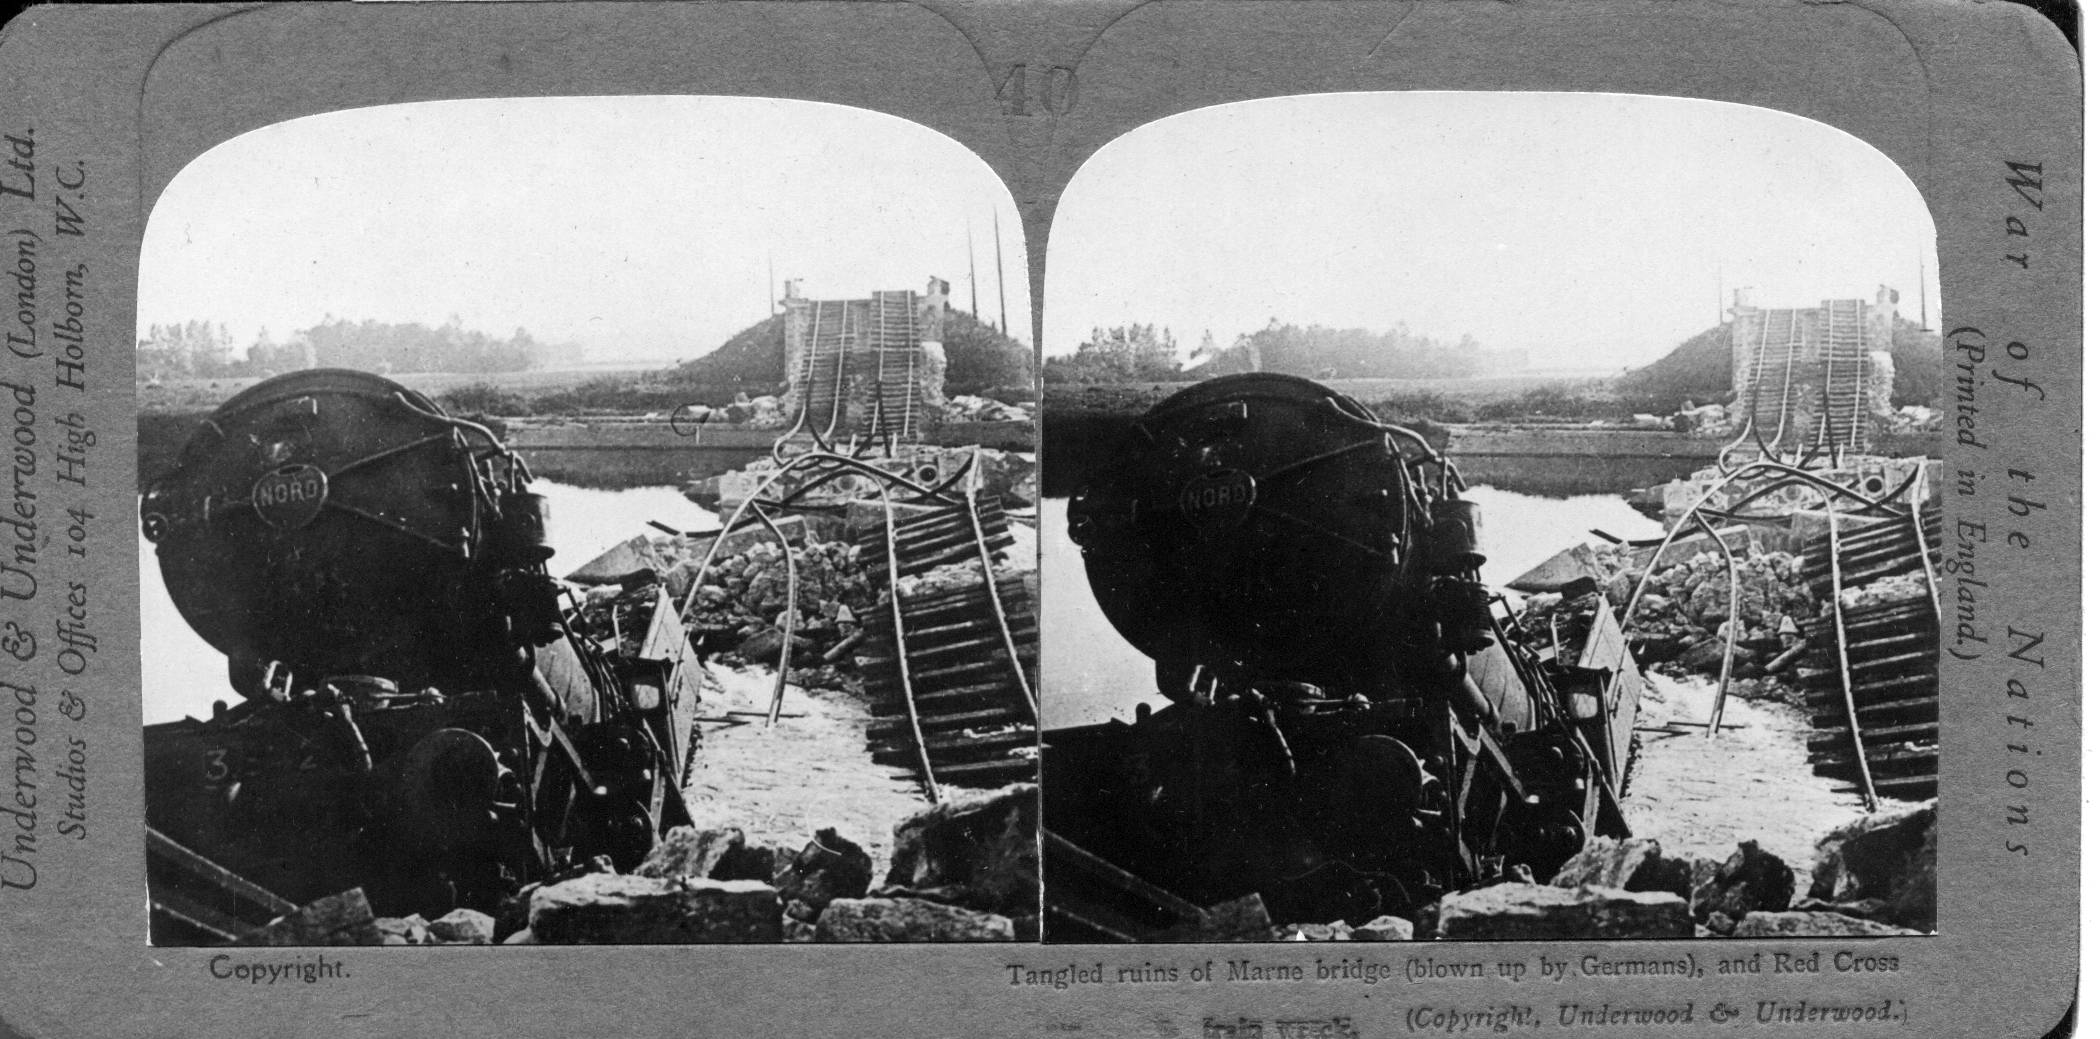 Tangled ruins of Marne bridge (blown up by Germans), and Red Cross train wreck